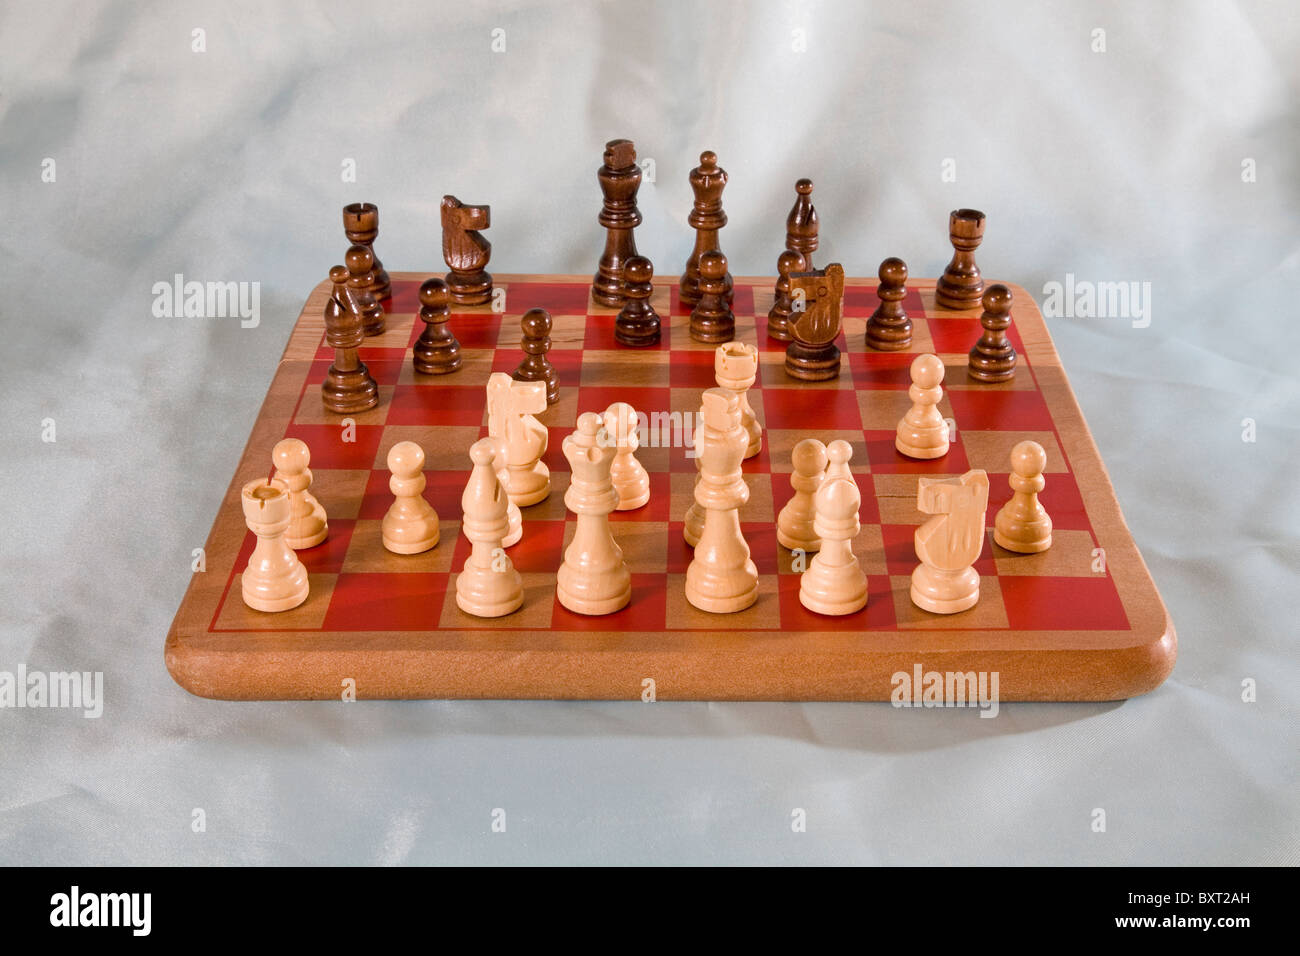 A chess board with chessmen placed in the starting position. Stock Photo